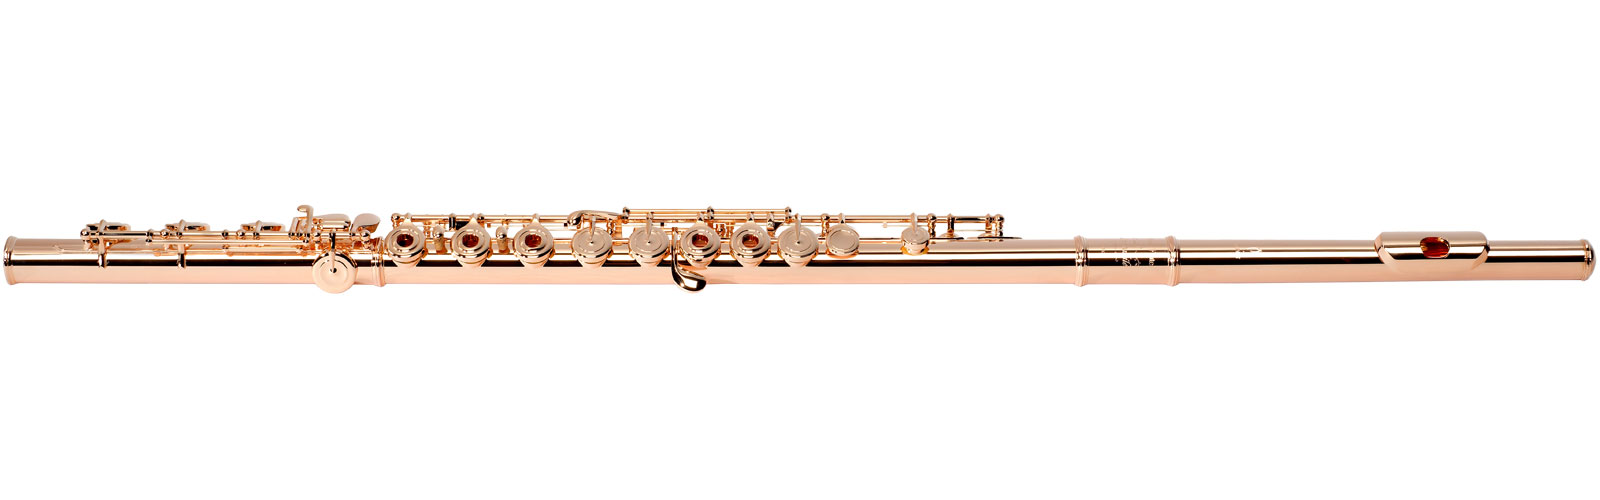 PEARL FLUTE CANTABILE - .925, PLAQUAGE OR ROSE (PATTE D'UT)